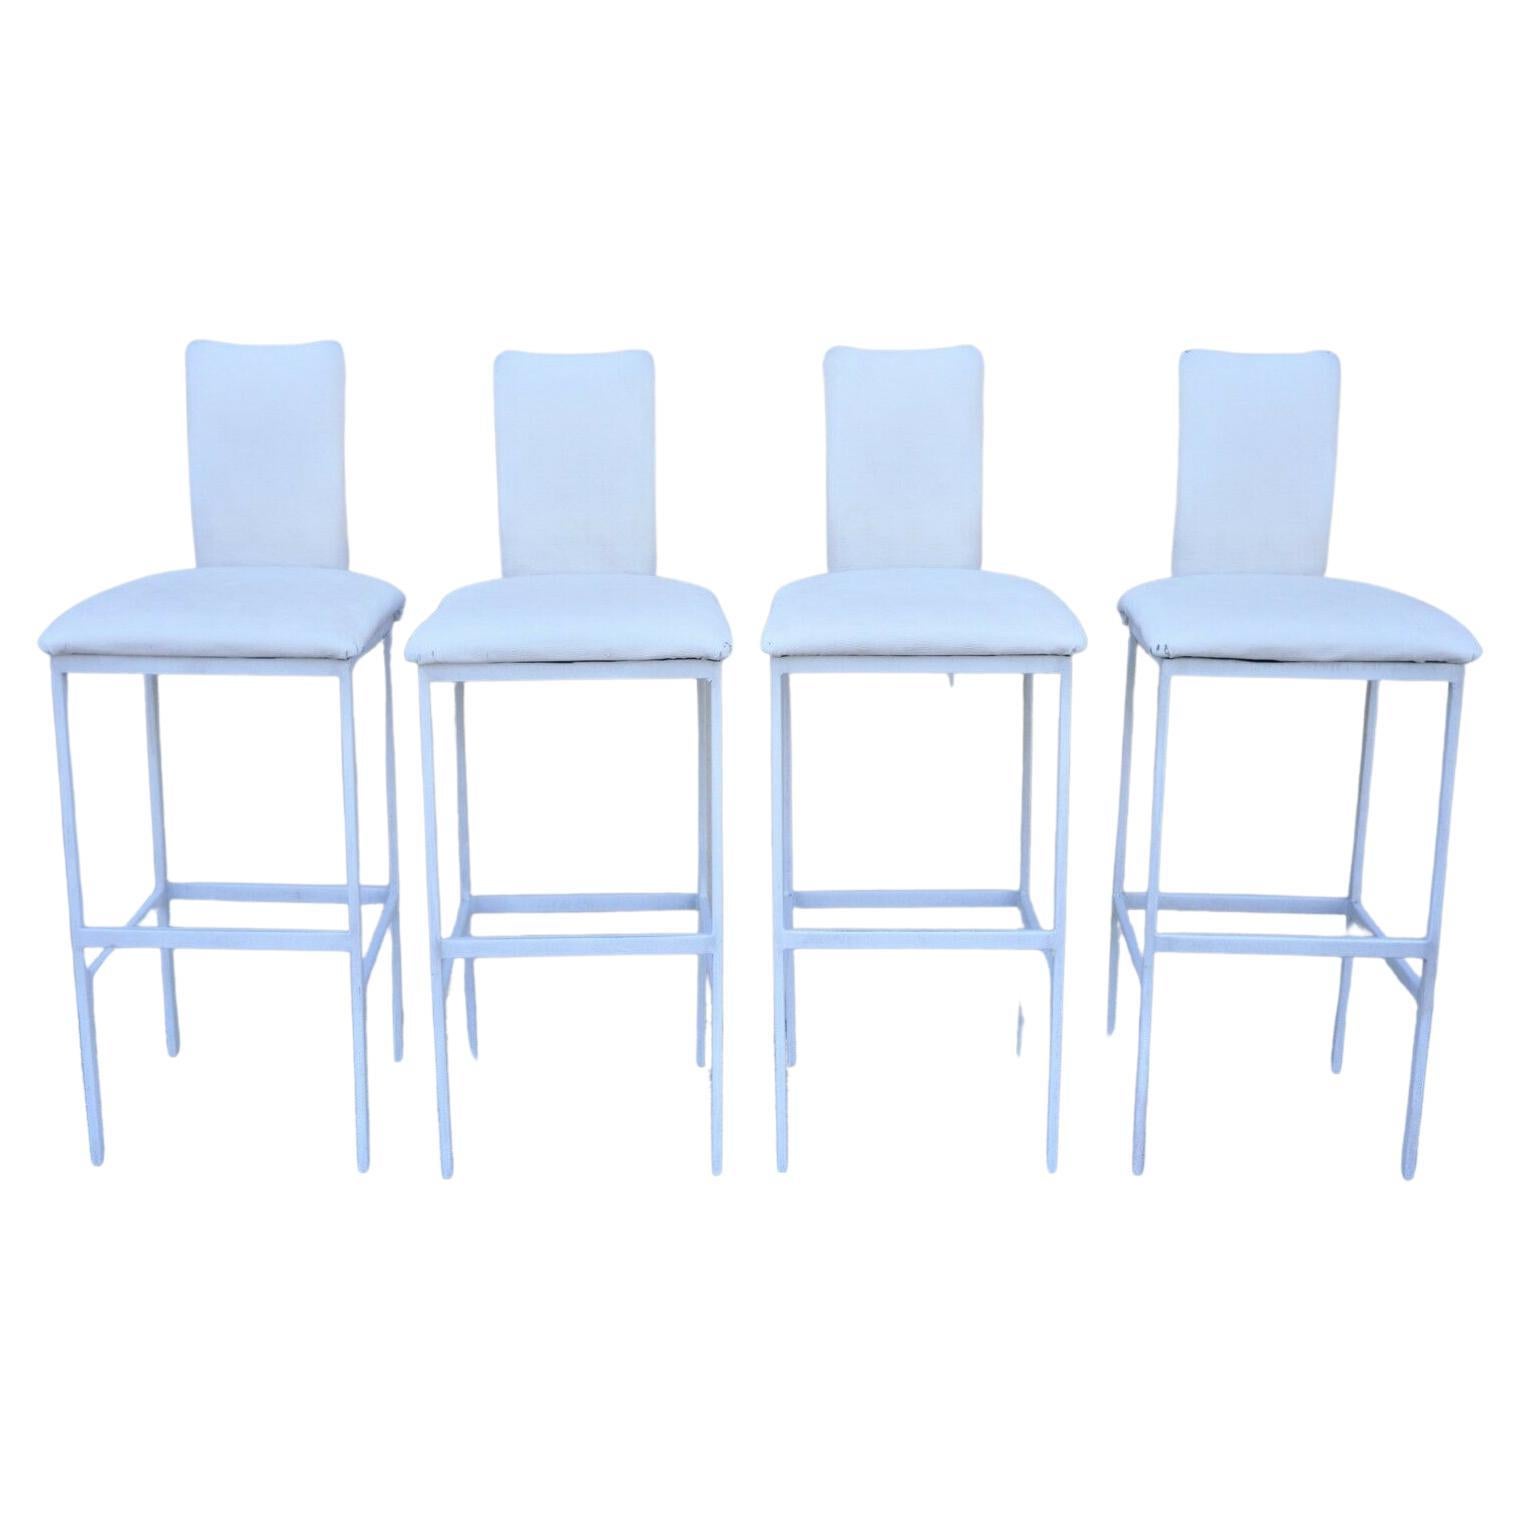 Minson Ent. Contemporary Modern White Metal Sculpted Barstools Chair - Set of 4 For Sale